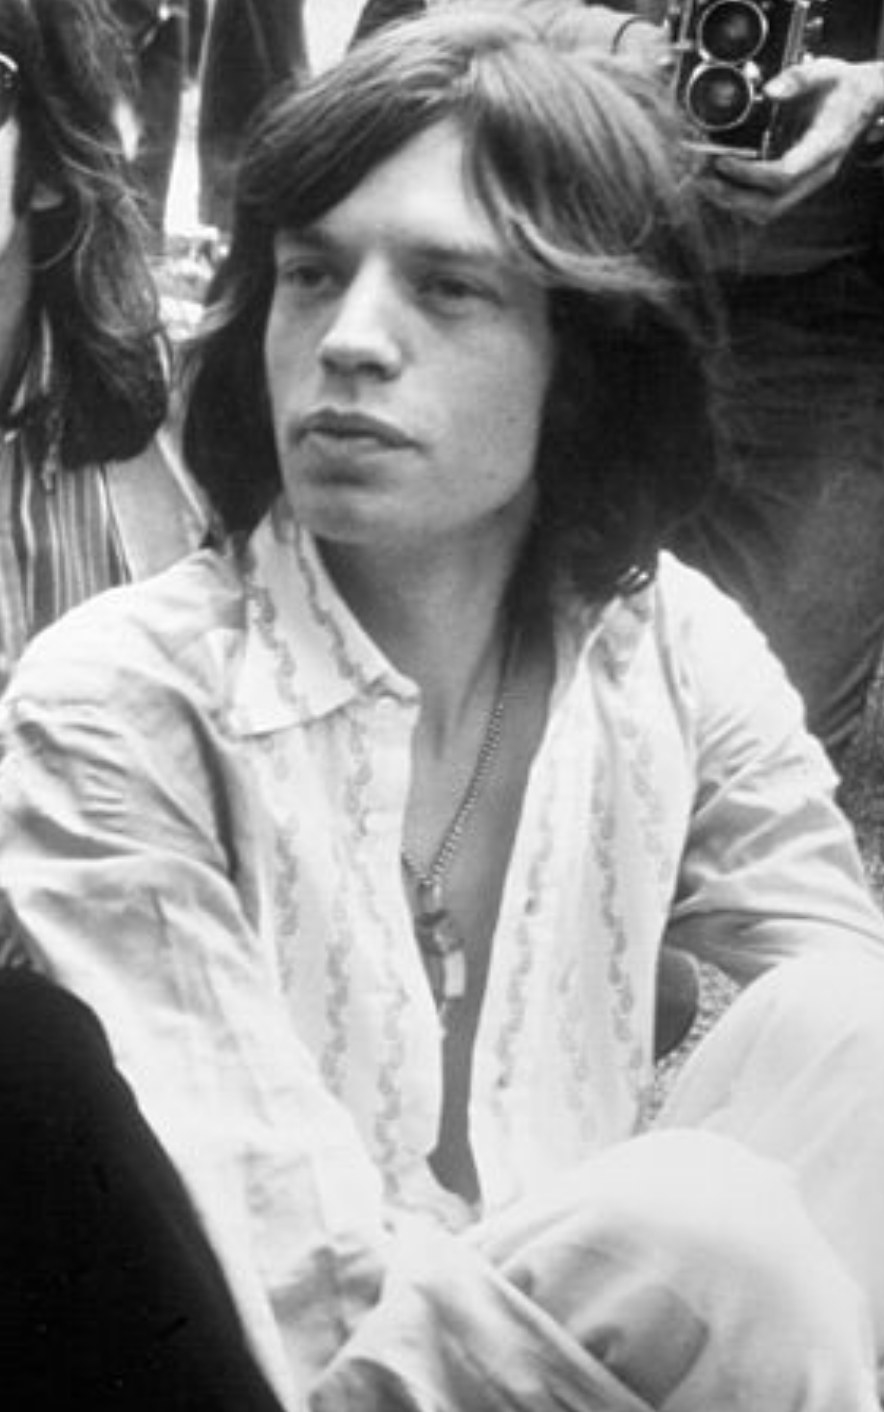 Jagger with the Rolling Stones in 1969 at Hyde Park